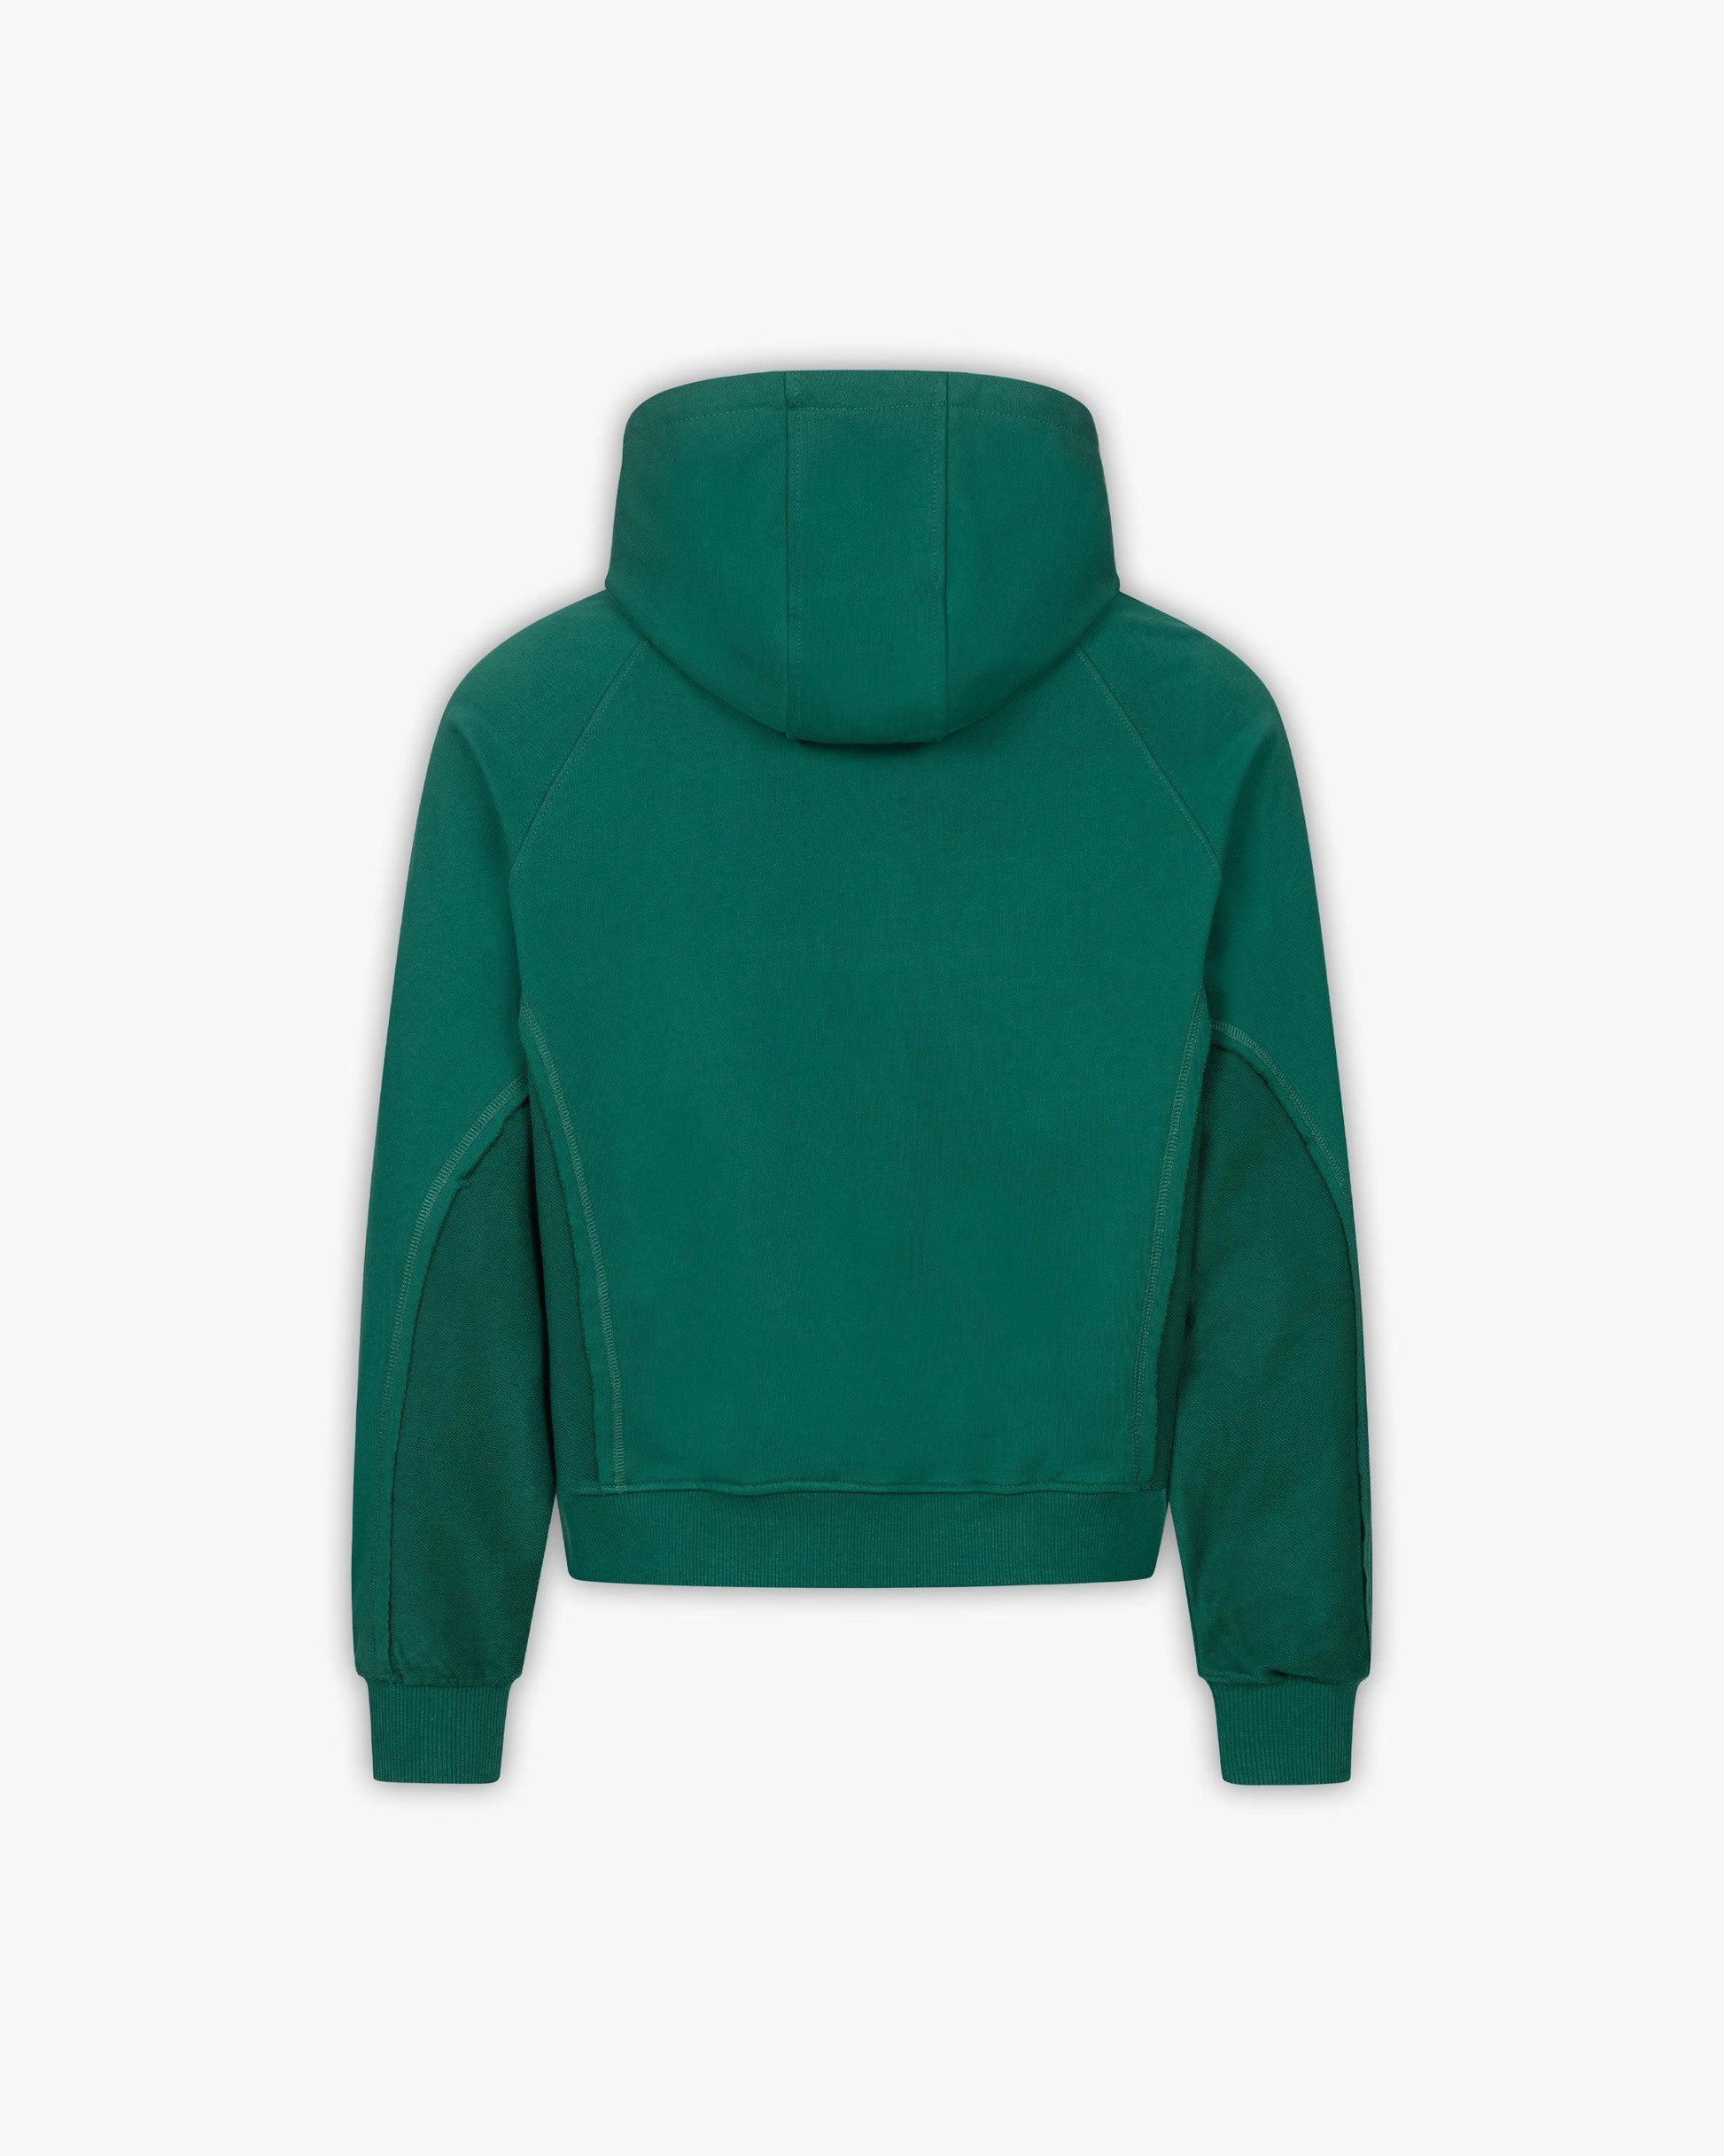 INSIDE OUT ZIP HOODIE FORREST GREEN - VICINITY